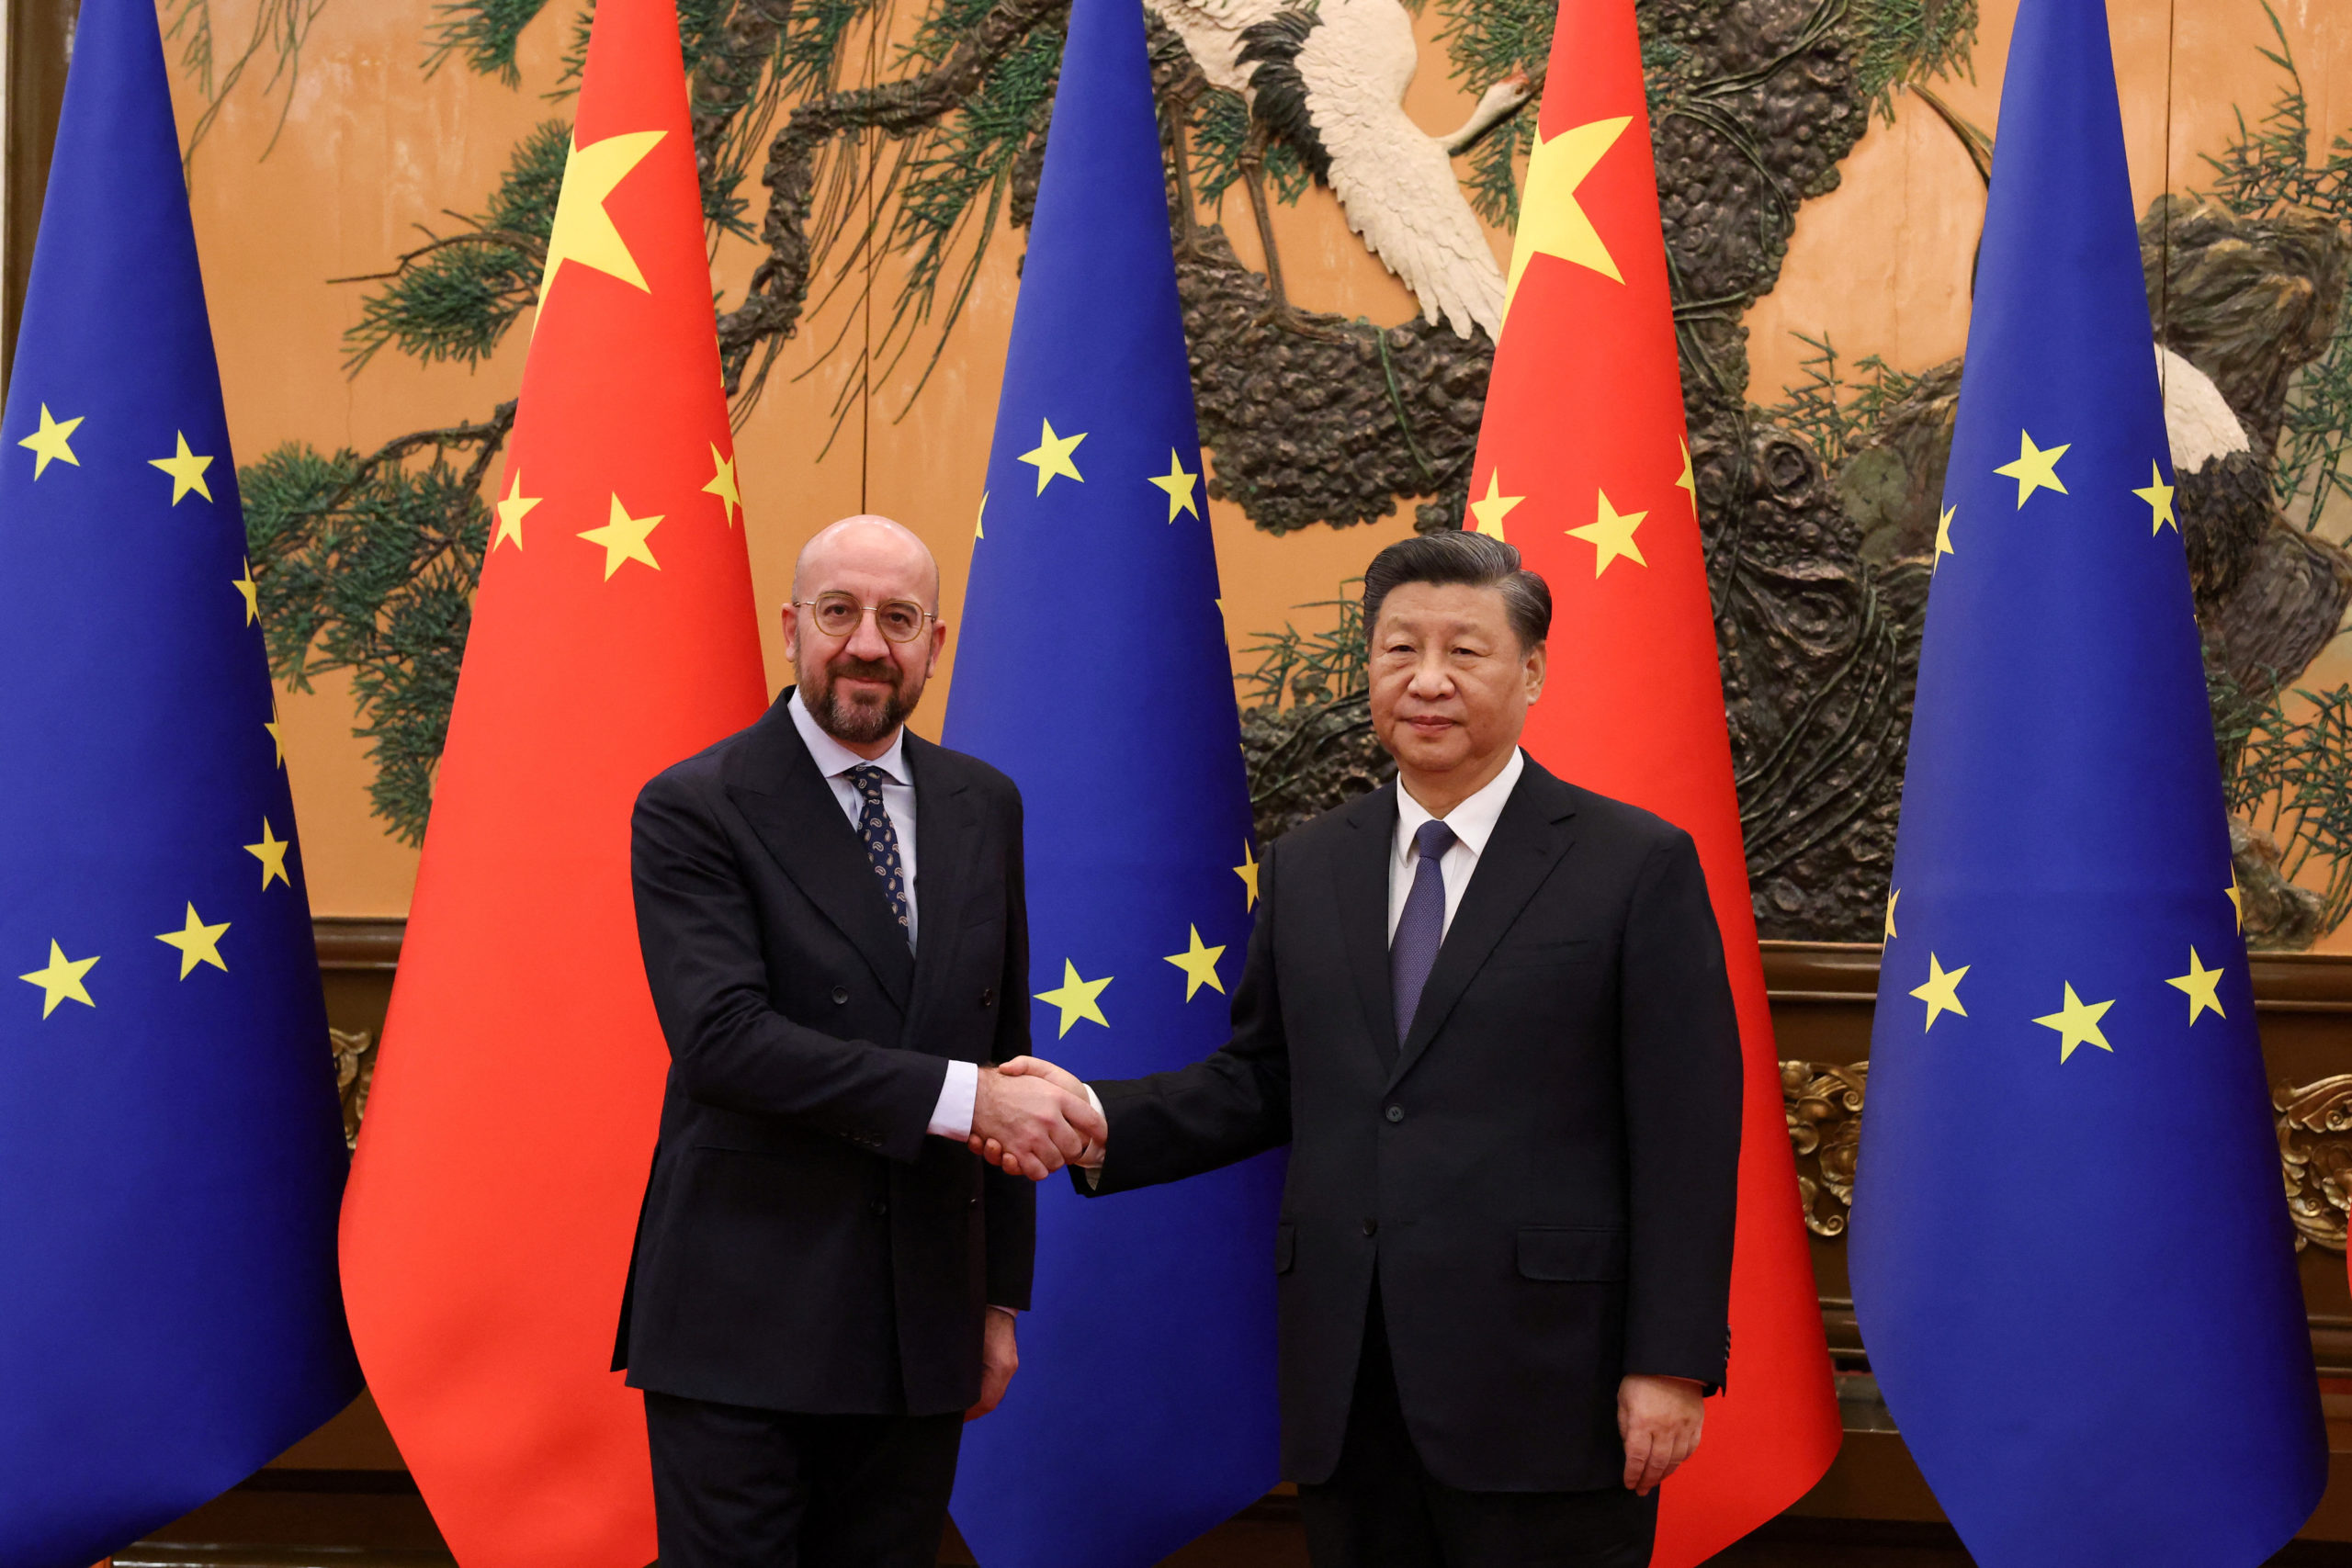 “We’ve got the vaccines you need,” European leader tells Xi Jinping